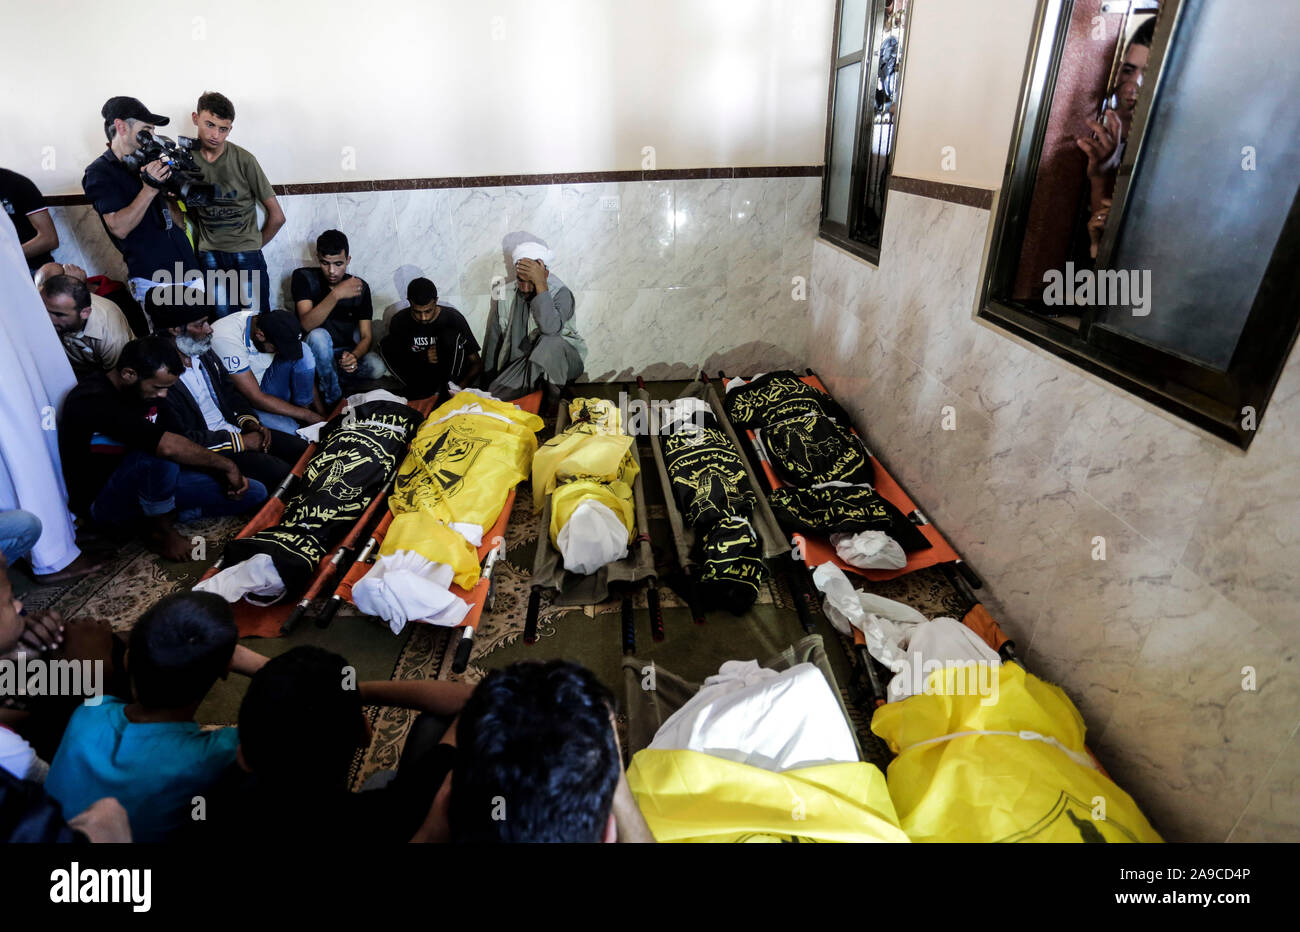 (EDITOR’S NOTE: Image depicts death)Palestinian mourners next to the bodies of Rasmi Abu Malhous and seven members of his family during their funeral at a mosque in Deir al-Balah, central Gaza Strip. The deceased were killed in an overnight Israeli missile strike that targeted their house. Stock Photo